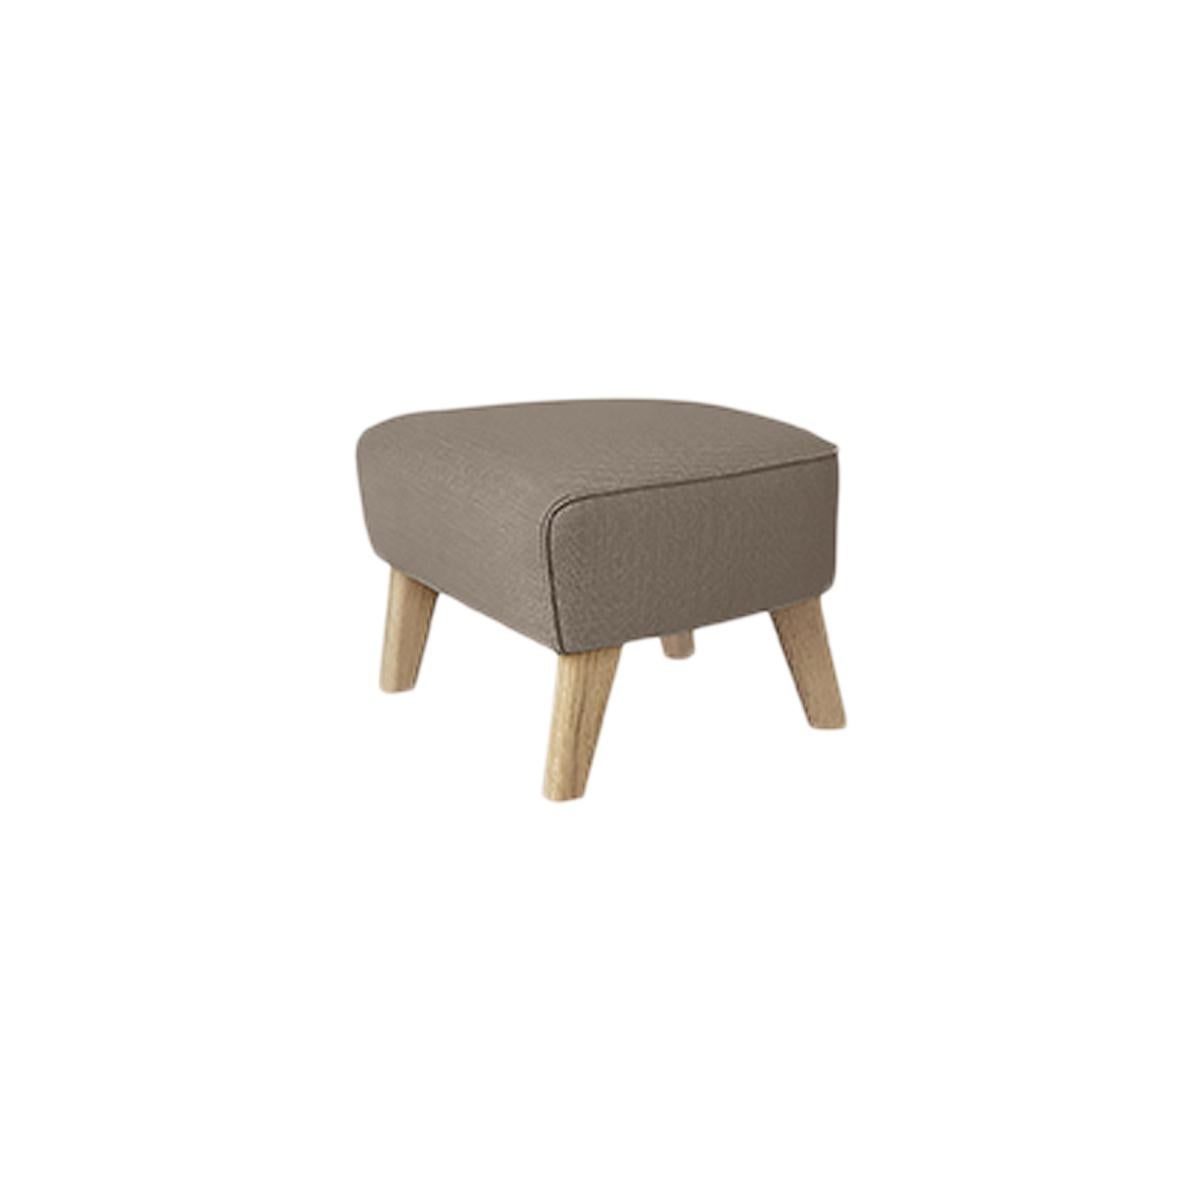 Dark beige and natural oak Raf Simons Vidar 3 my own chair footstool by Lassen
Dimensions: W 56 x D 58 x H 40 cm 
Materials: Textile
Also Available: Other colors available.

The my own chair footstool has been designed in the same spirit as